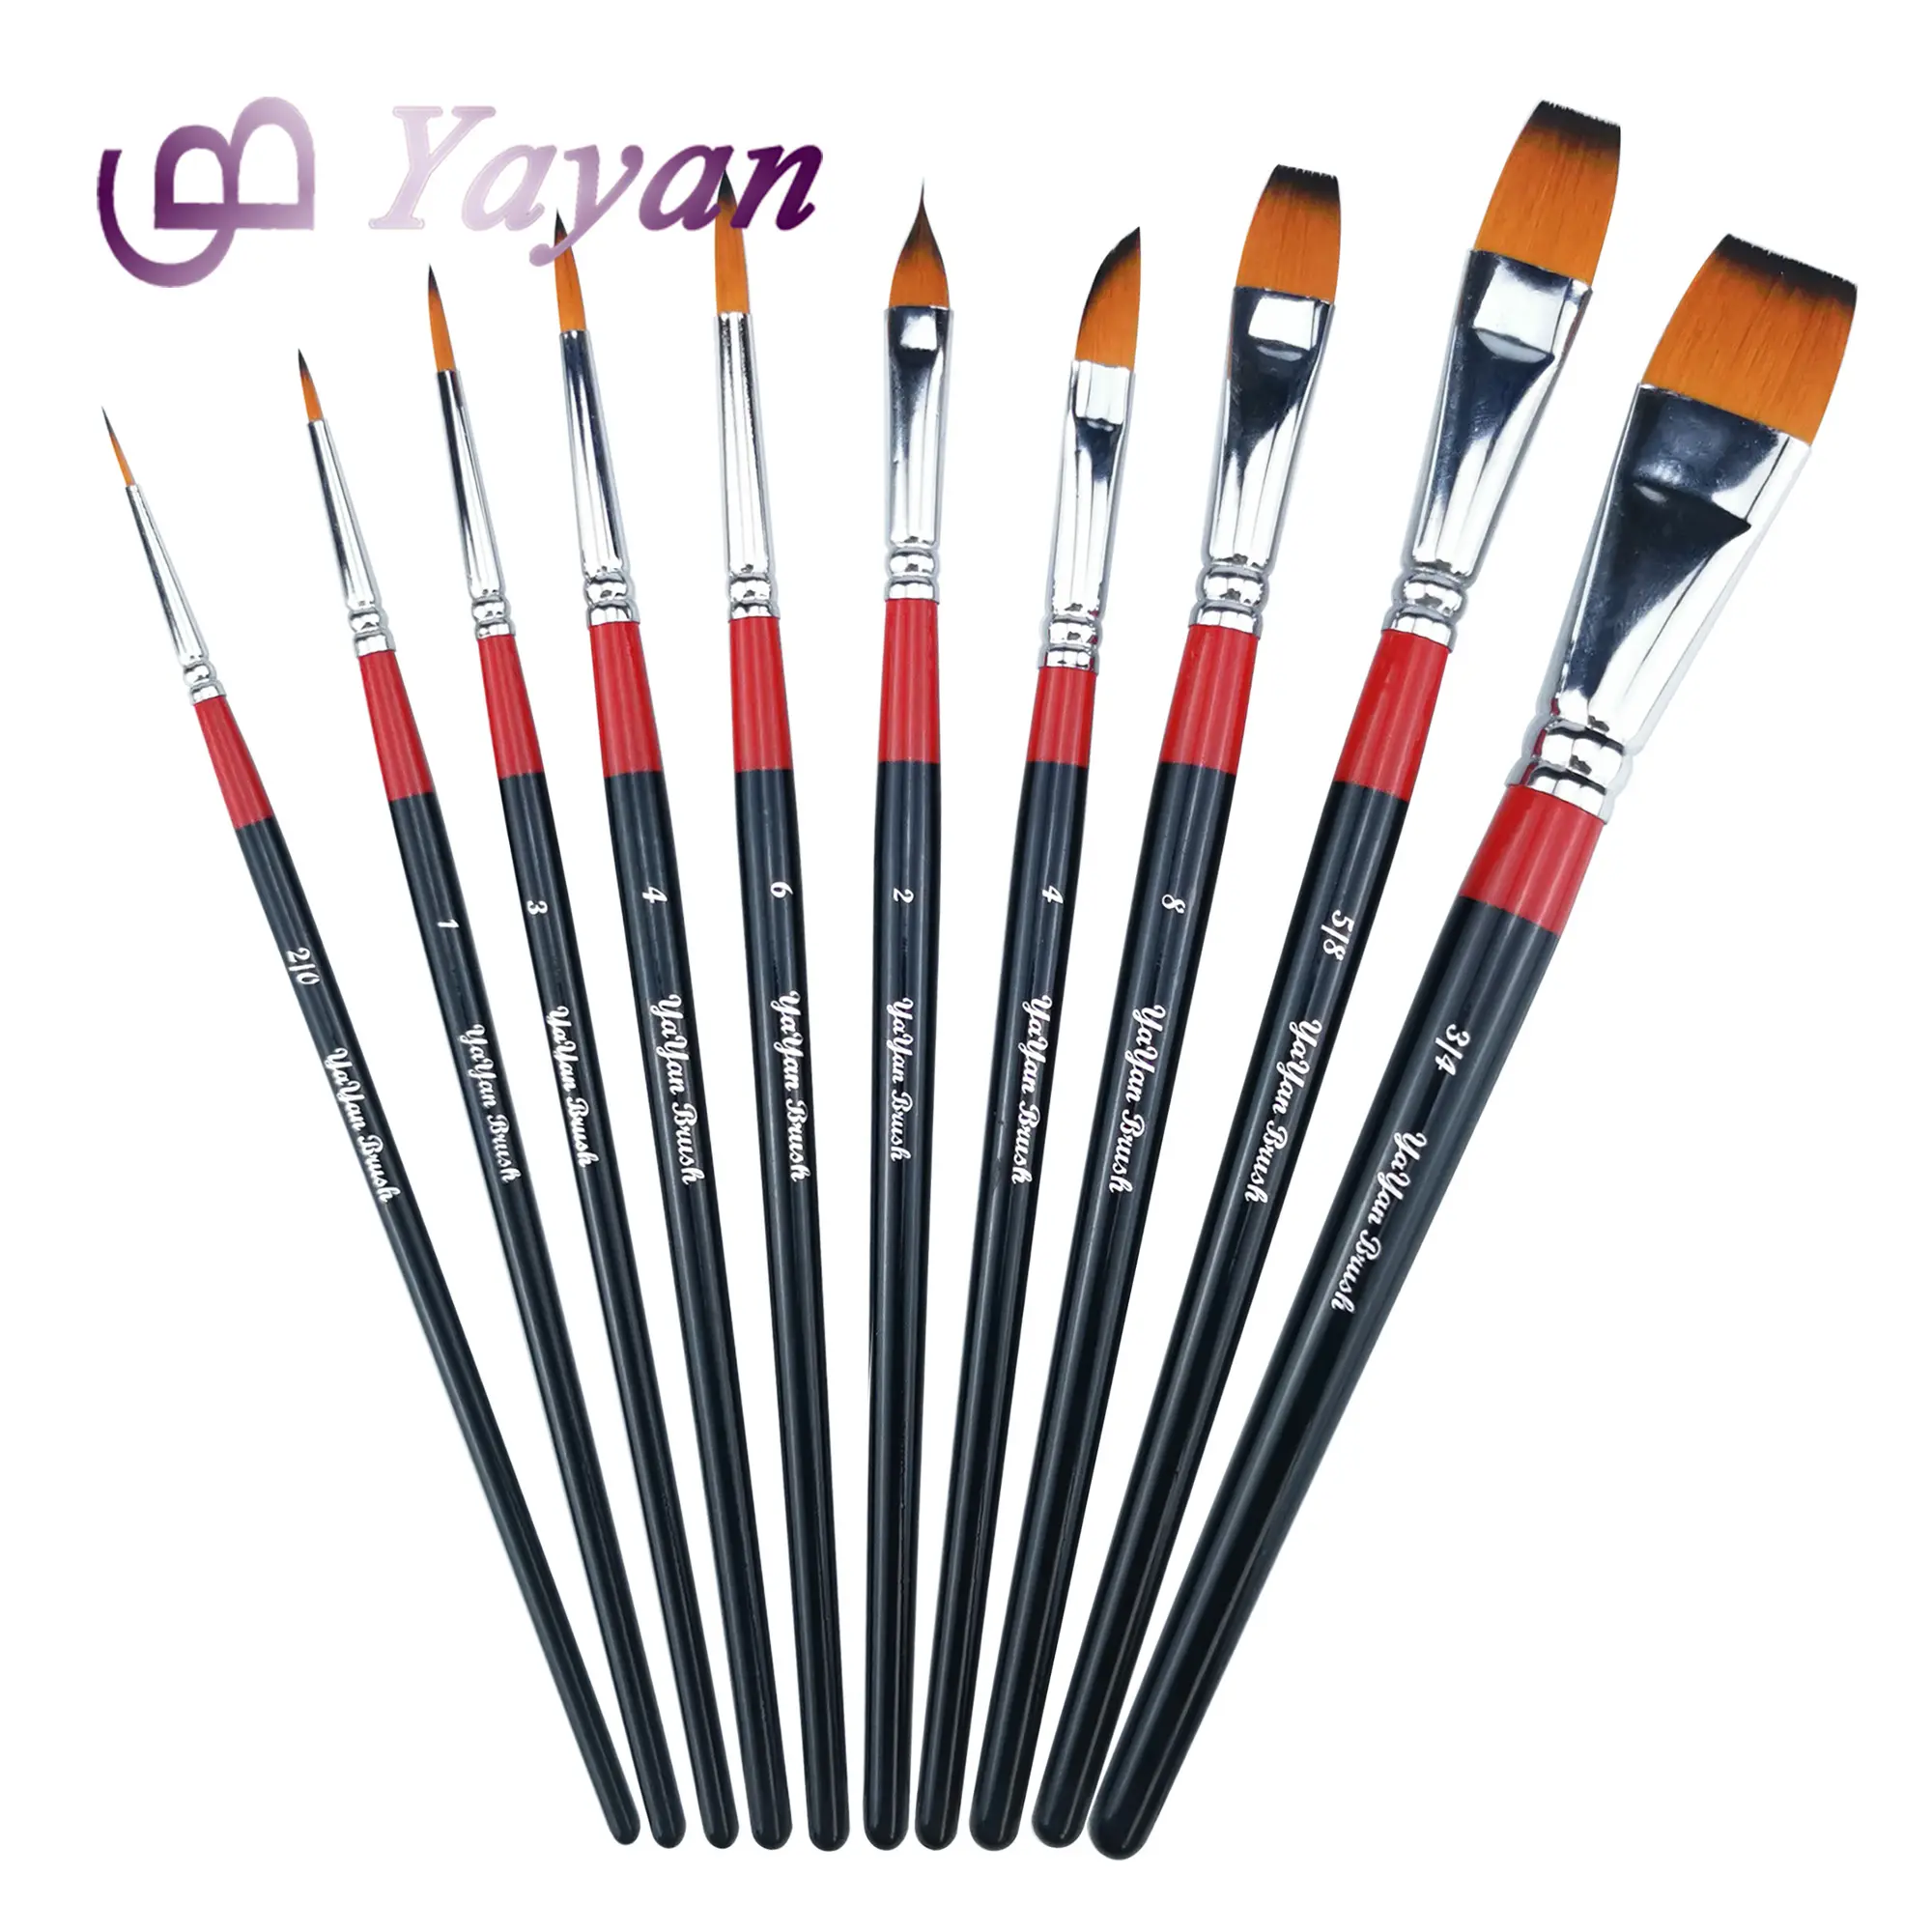 10 pcs Watercolor Paint Brush Set Professional Water Color Brushes for Artist Painting With nylon hair wood handle